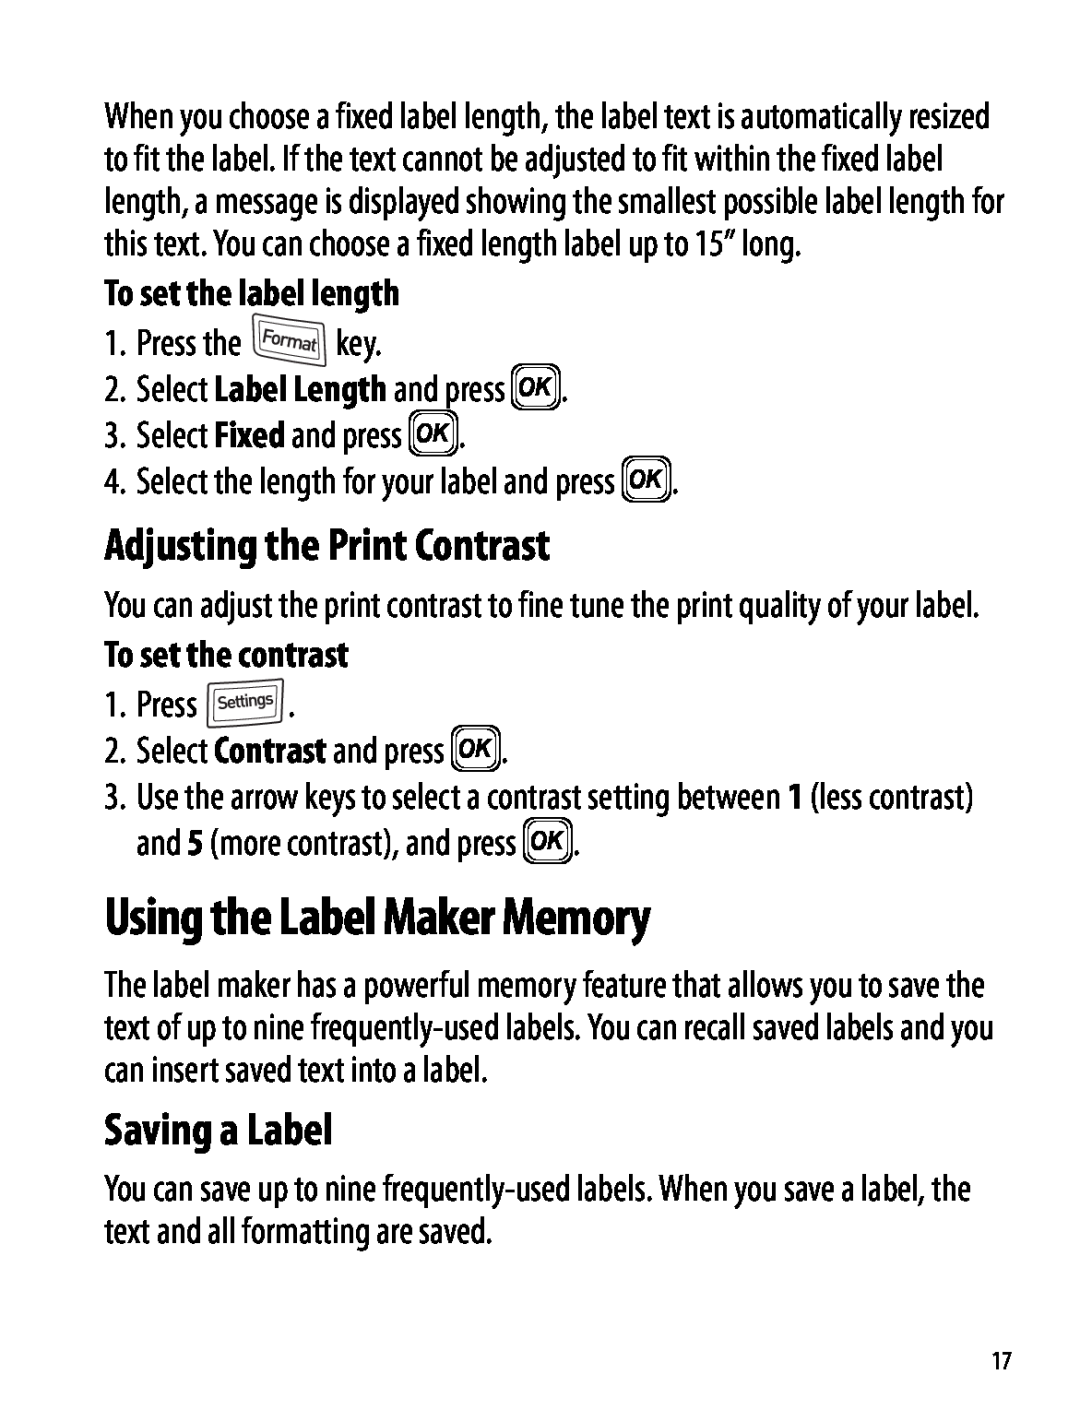 Dymo 220P manual Using the Label Maker Memory, Adjusting the Print Contrast, Saving a Label, To set the label length 